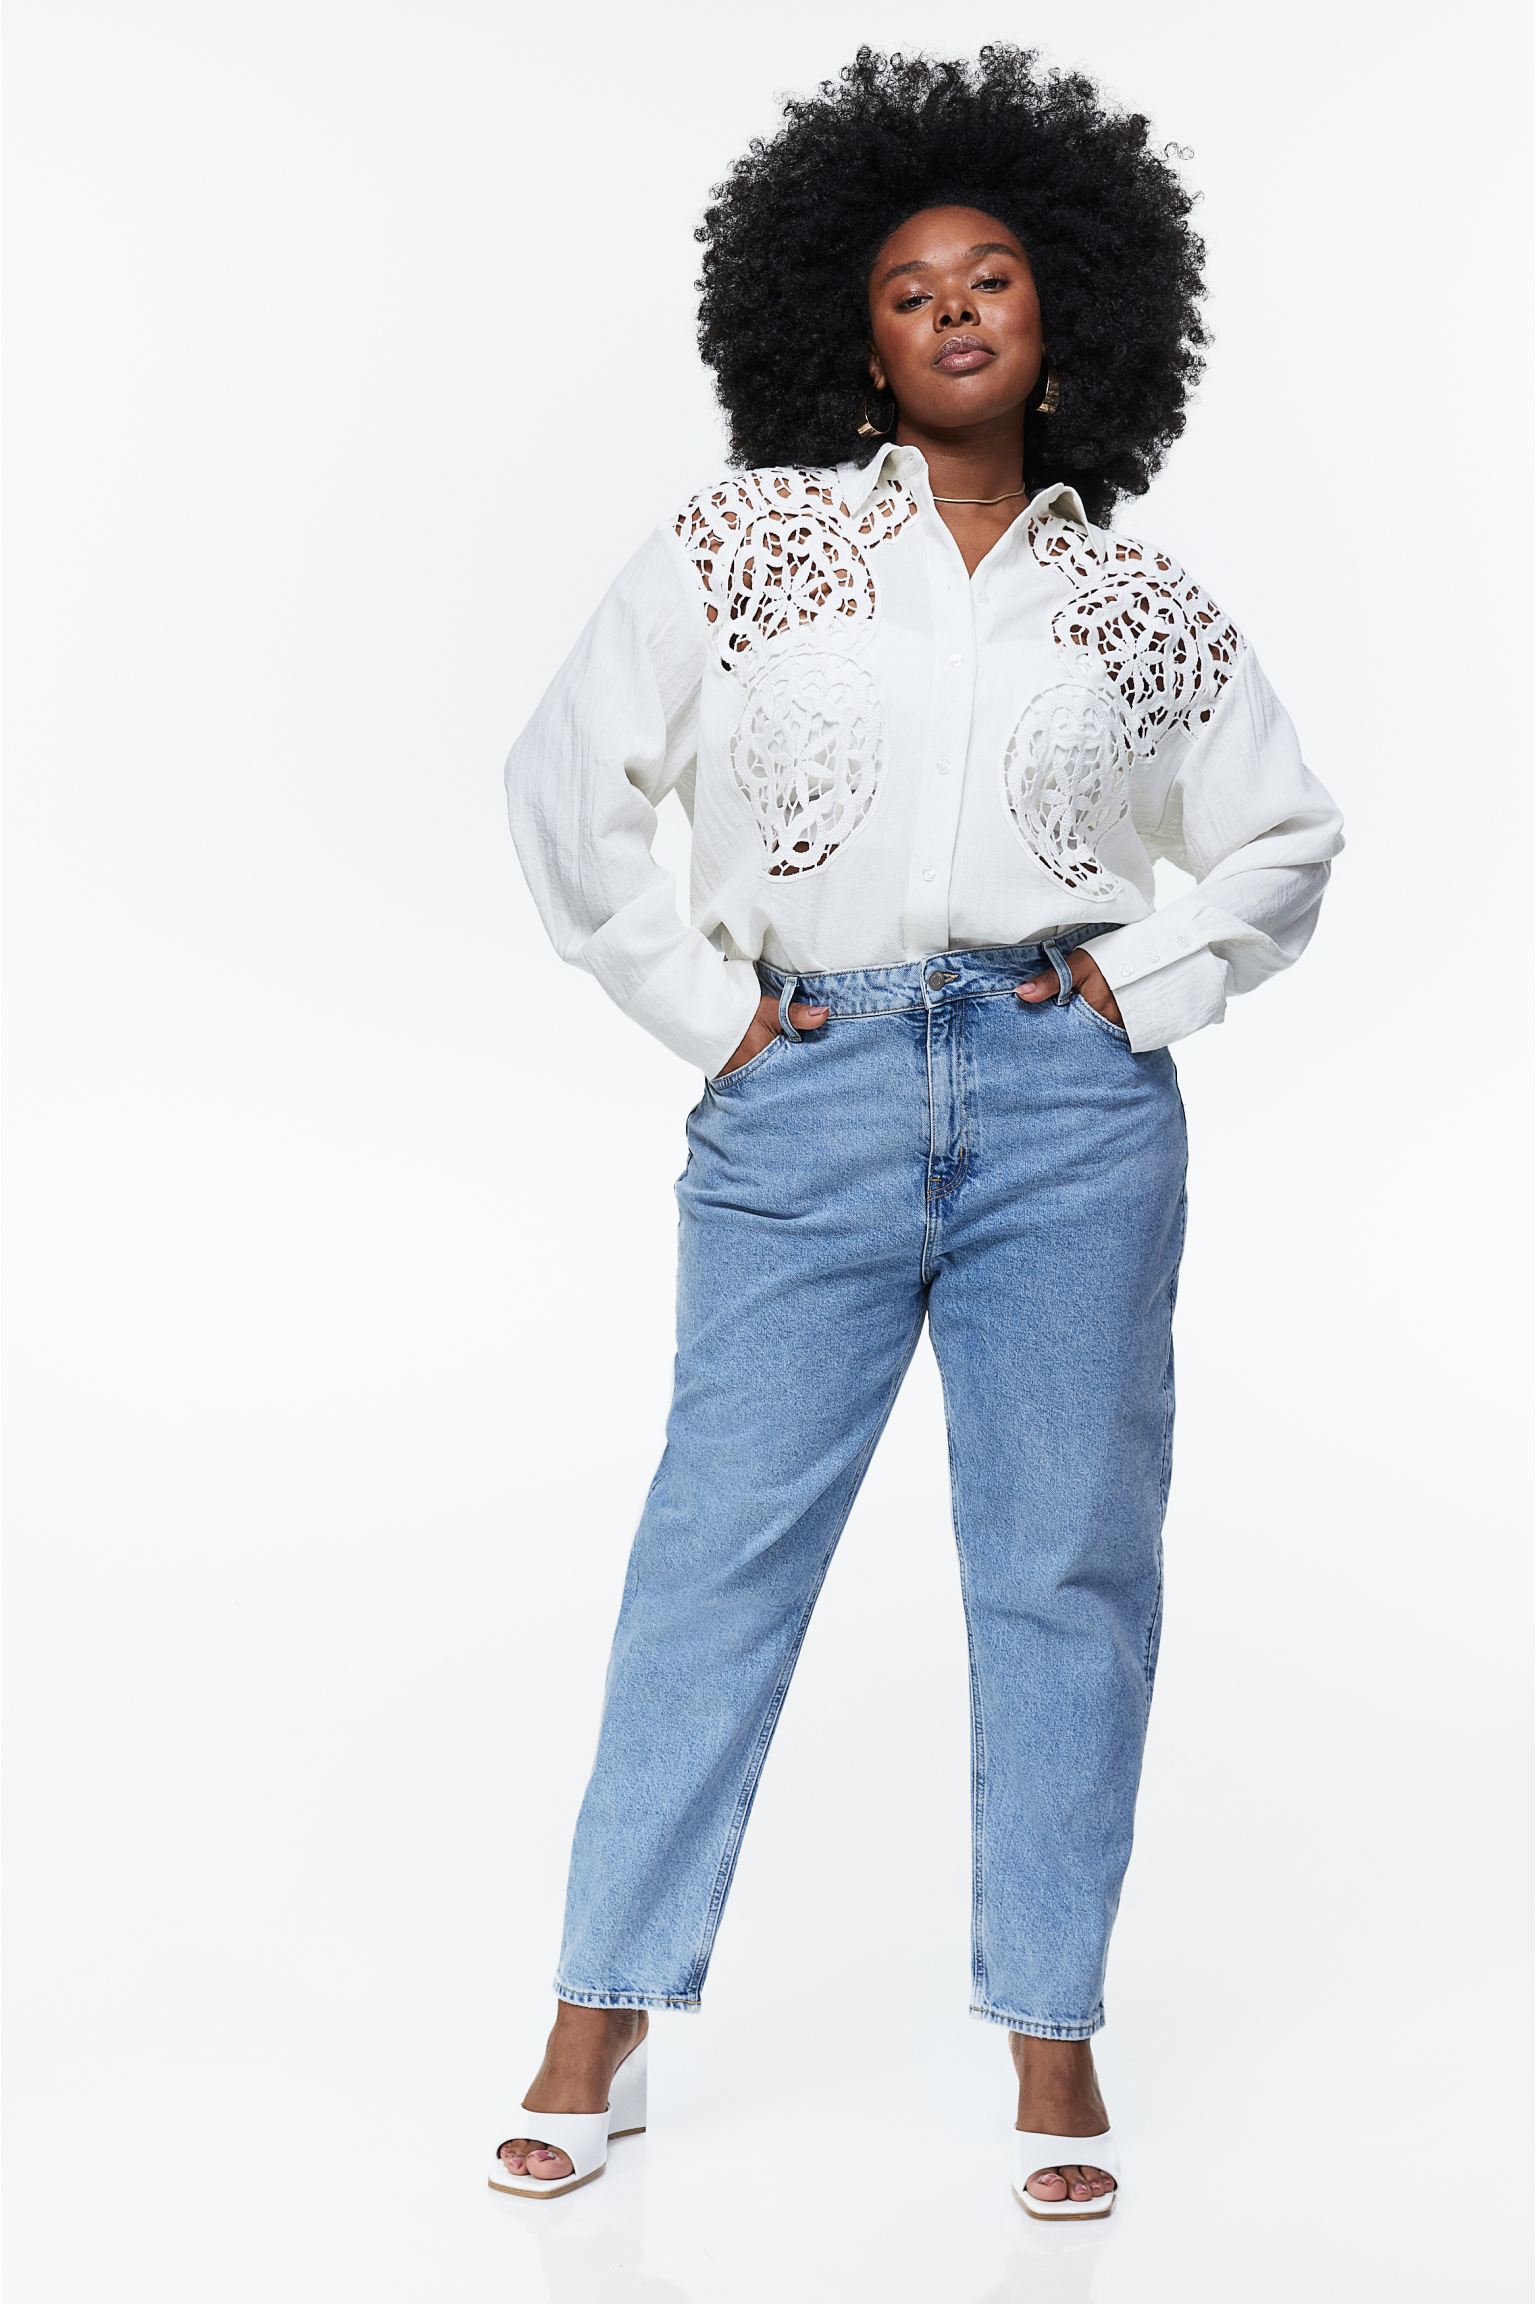 23 Jeans for Thick Thighs That Won't Gap at the Waist 2022: Everlane,  Levi's, Madewell, Good American | SELF